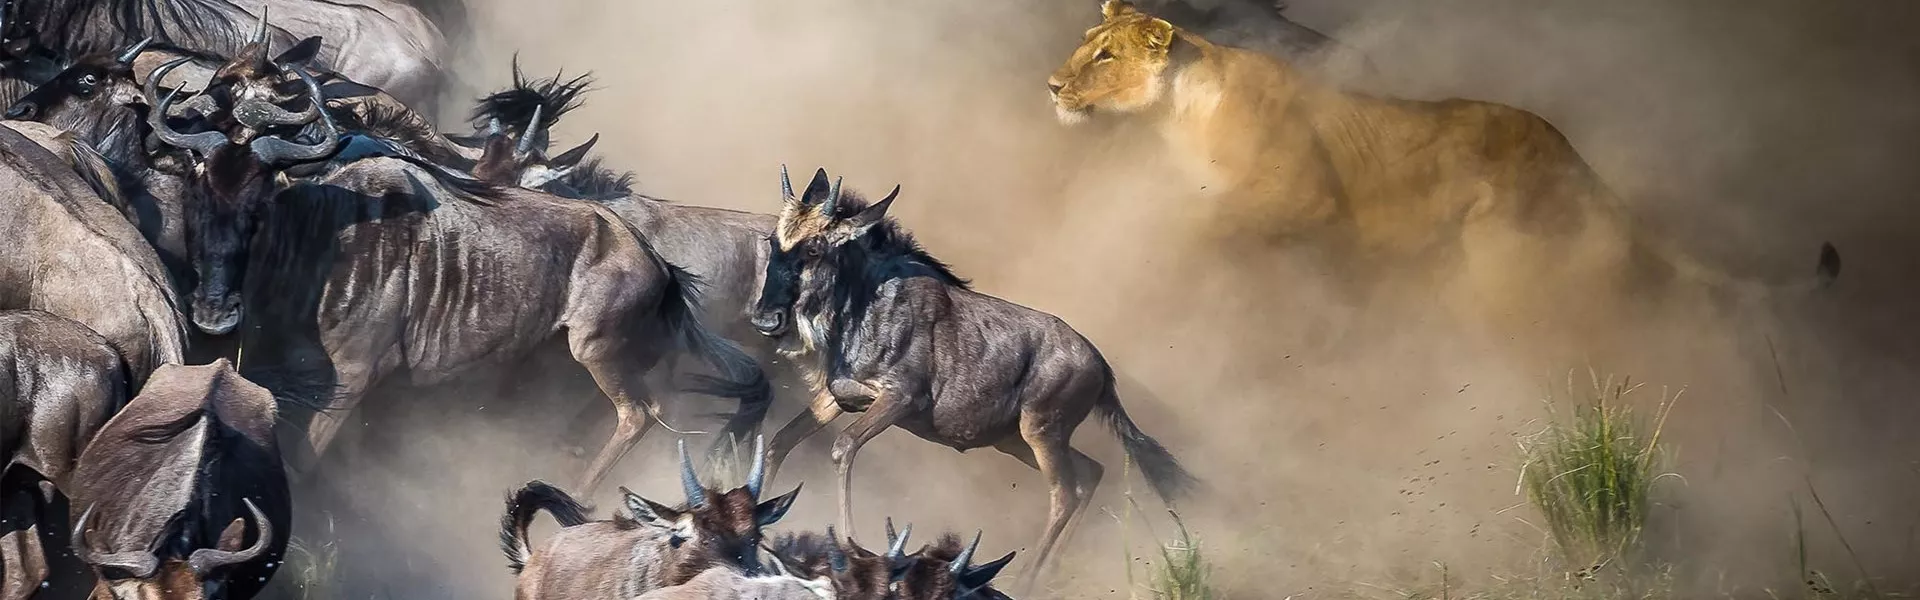 Wildebeest with a lioness